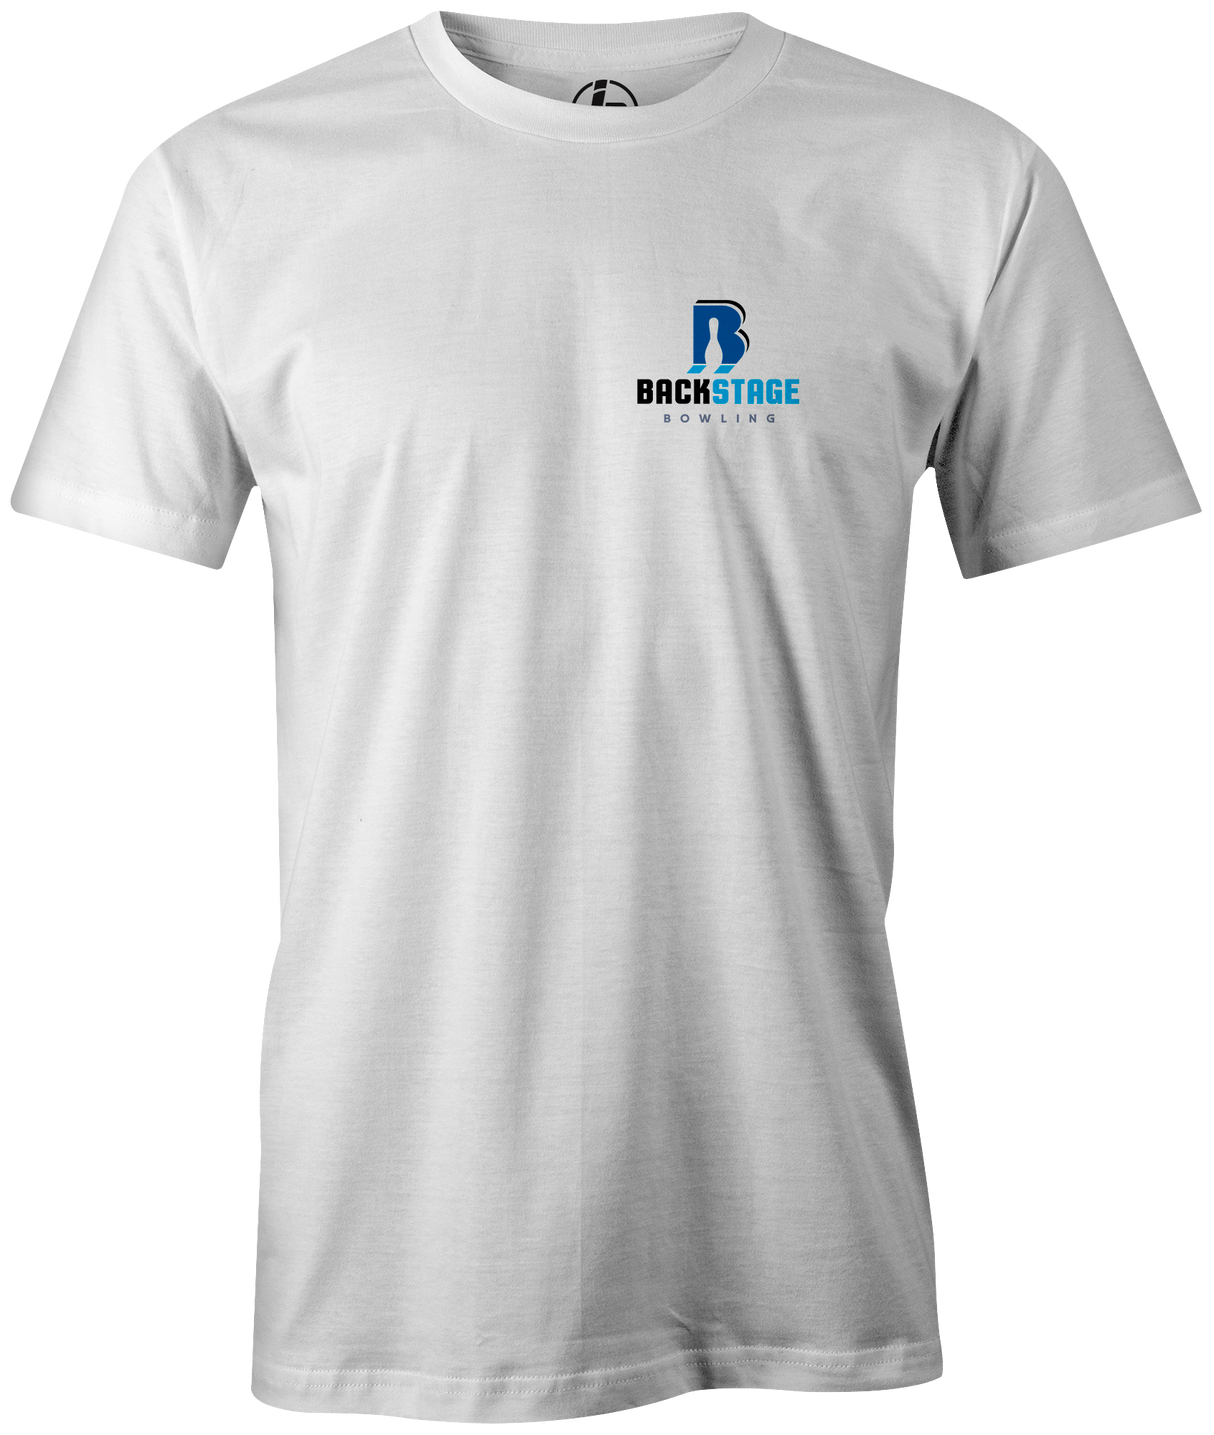 Backstage Bowling T-shirt, men's, white, tee, tee-shirt, t shirt, apparel, merch, practice, lanes, free shipping, discount, cheap, coupon, shannon o'keefe, bryan o'keefe, mike jasnau, mike shady, coaching, membership, cool, vintage, authentic, original